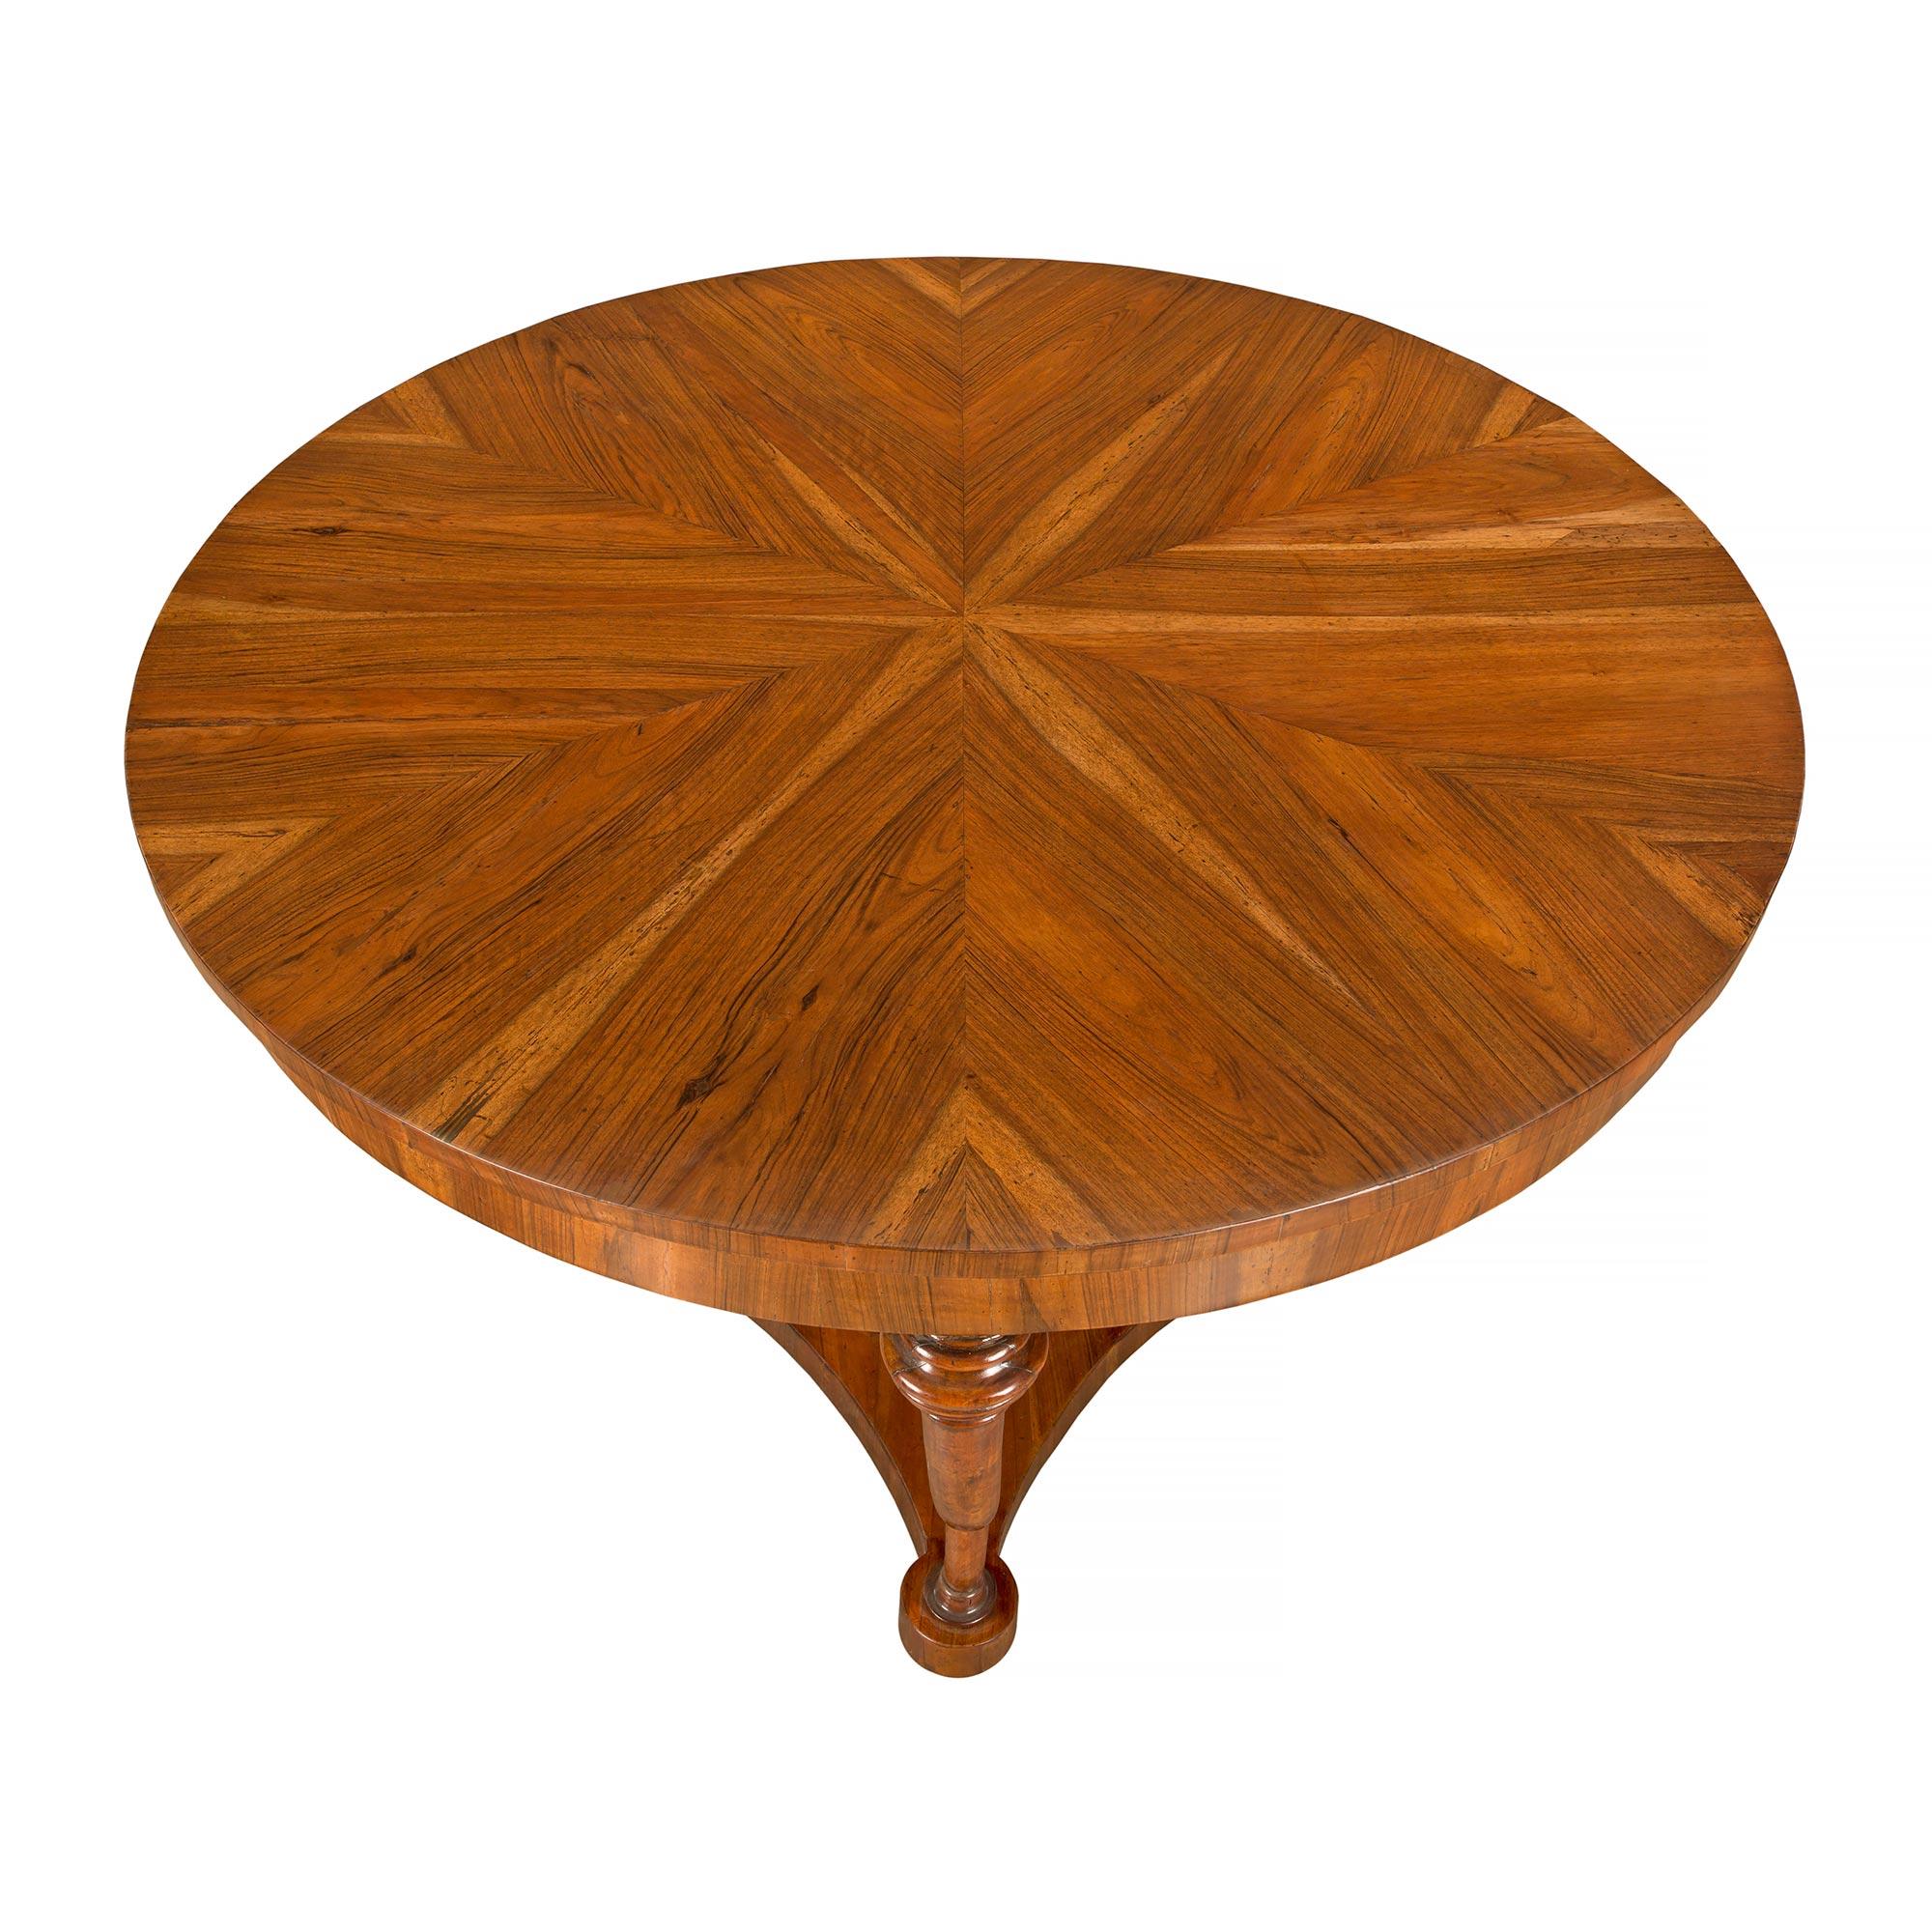 A very attractive Italian mid 18th century Tuscan walnut center table. The table is raised on a concave sided bottom tier with scrolled supports at each corner. The central fut is a solid fluted column that supports the walnut top and apron. All